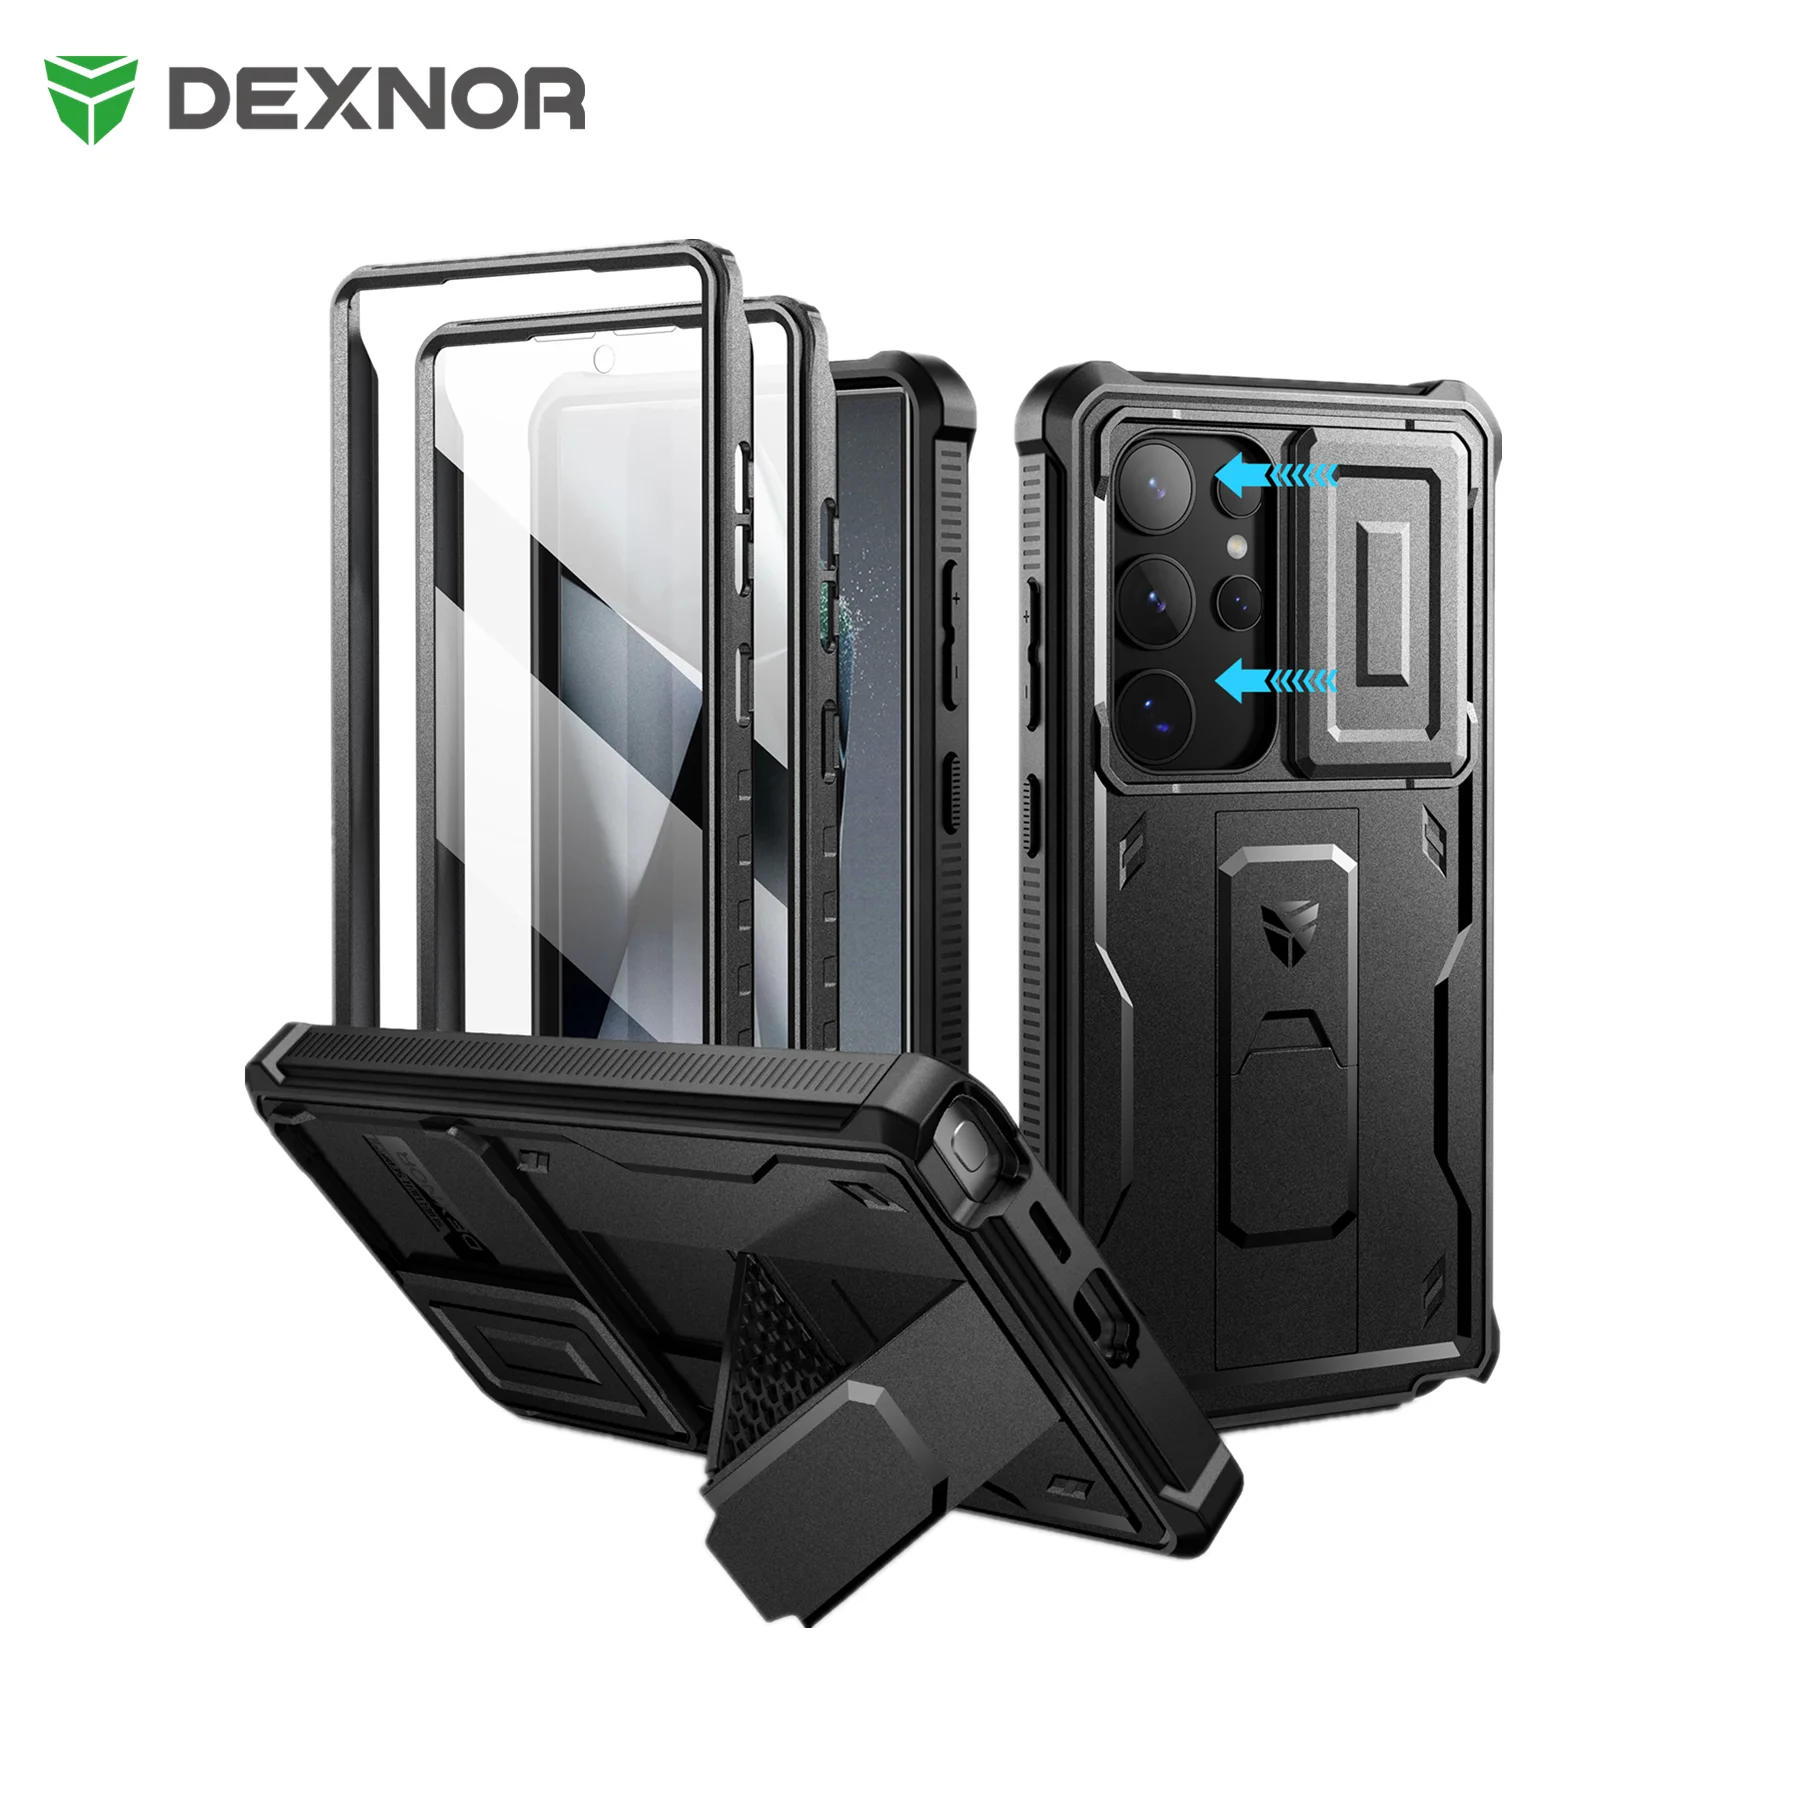 

Dexnor Case For Samsung Galaxy S24 Ultra 5G 6.8 inch Full Body Rugged Case with Camera Cover Built-in Screen Protector Kickstand